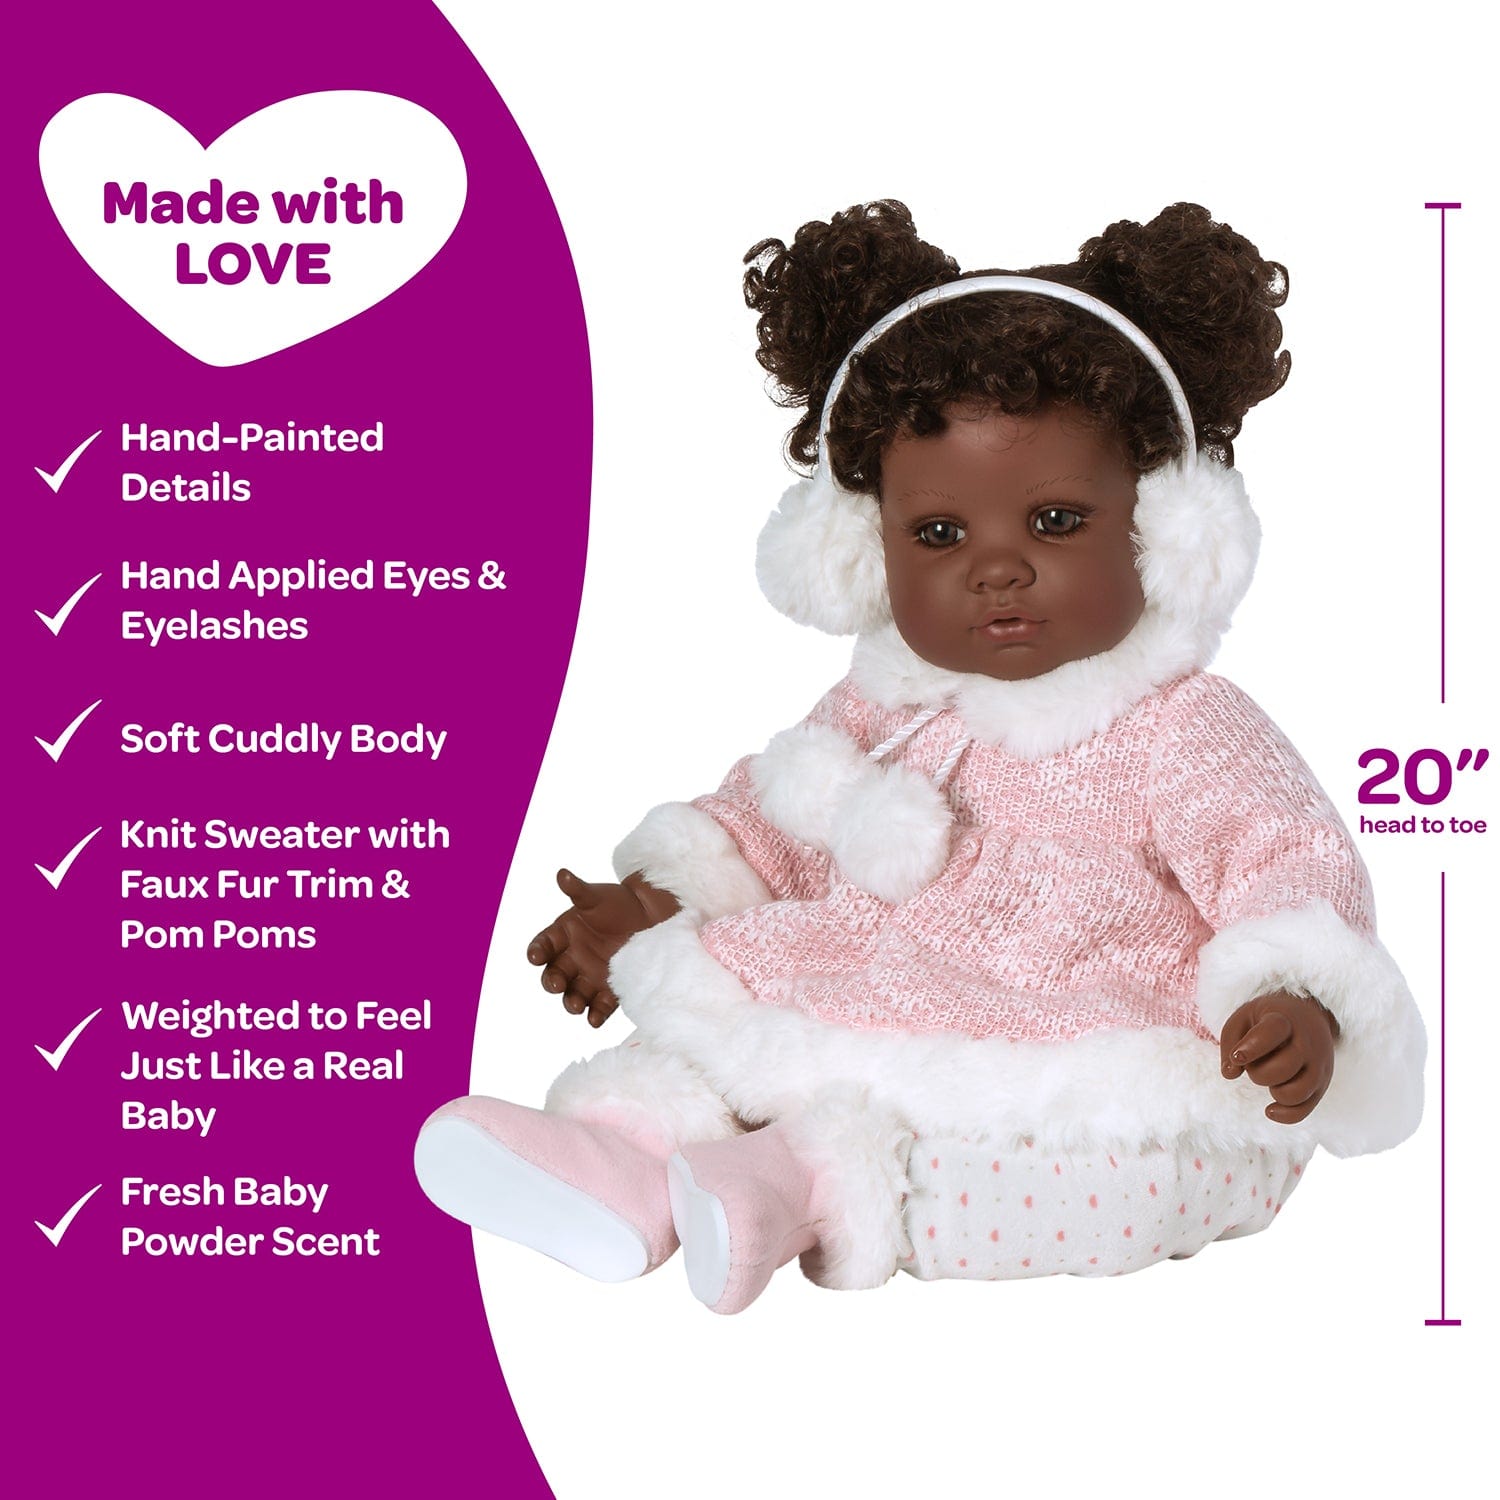 Adora Toddlertime Winter Dream African American Baby Doll, Doll Clothes & Accessories Set